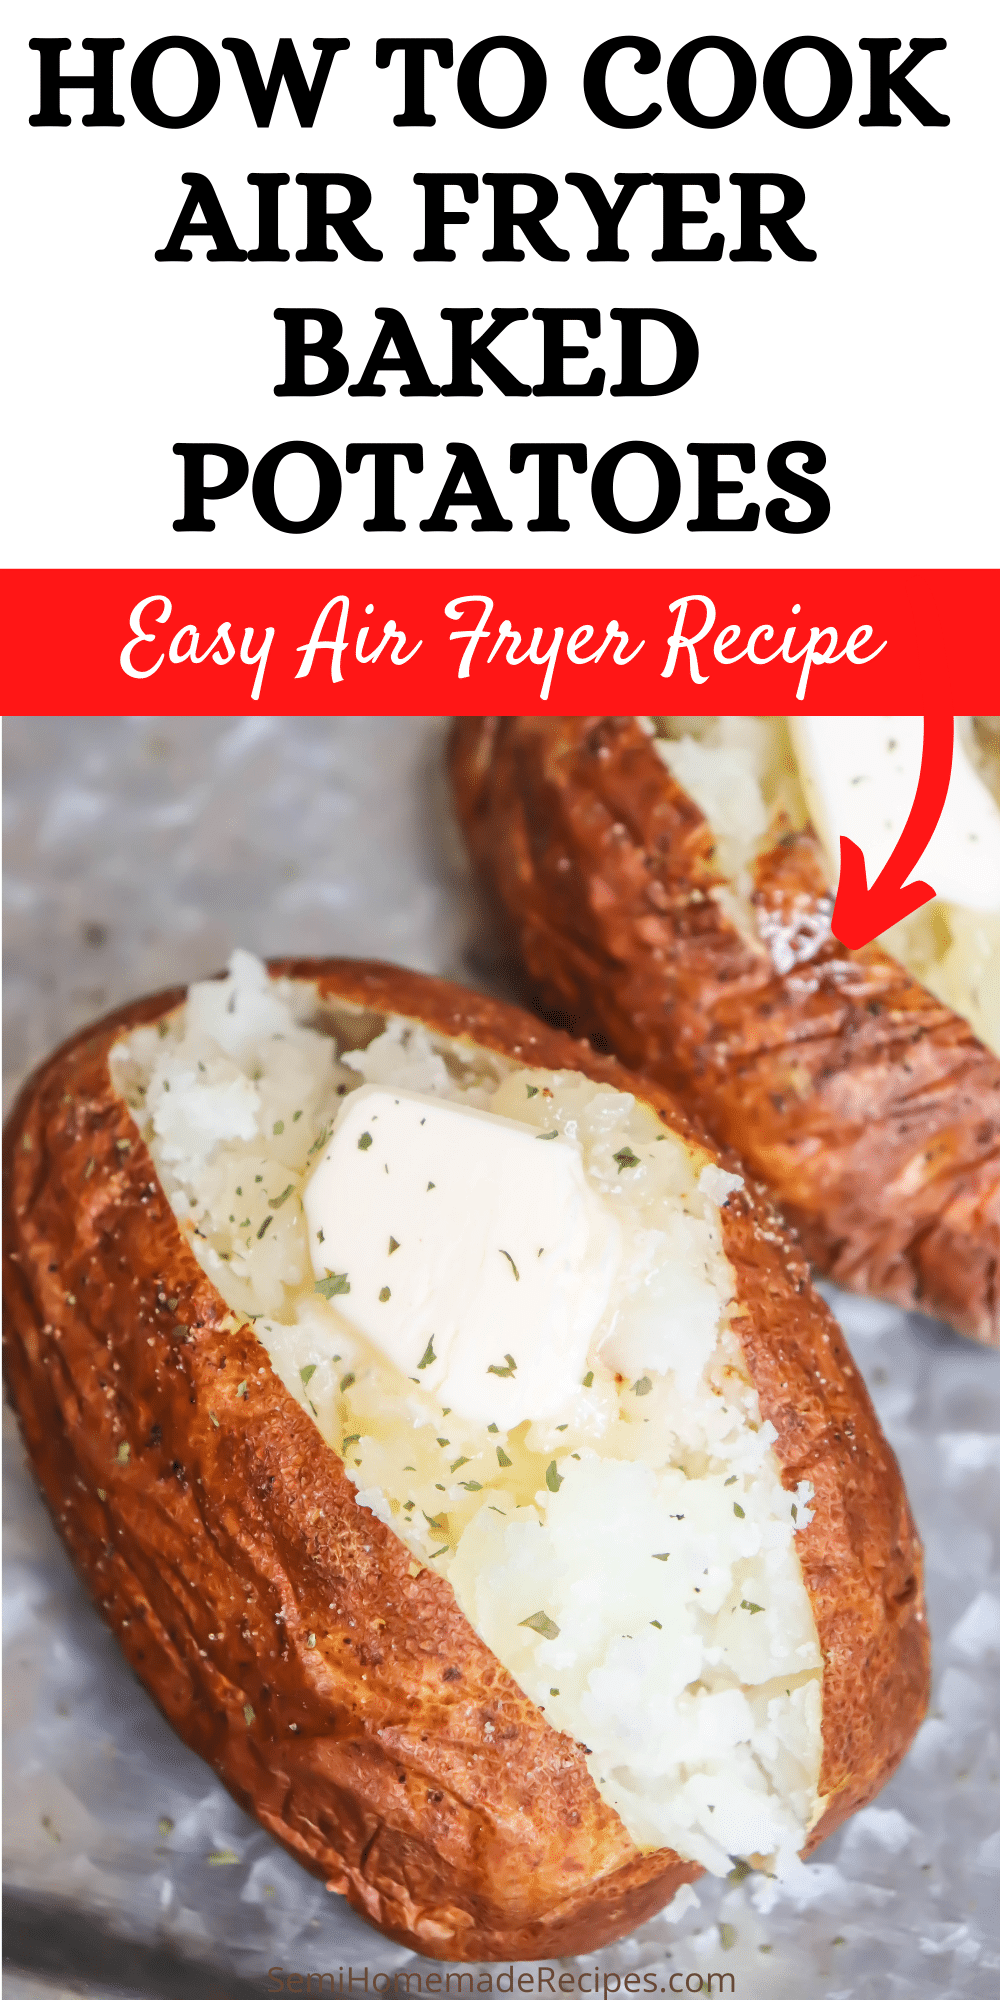 You're going to love these air fryer baked potatoes! The potato skins come out crisp but you still get that perfect fluffy baked potato center! Great with all of your favorite baked potato toppings like: butter, cheese, bacon or sour cream!  via @bigbearswife